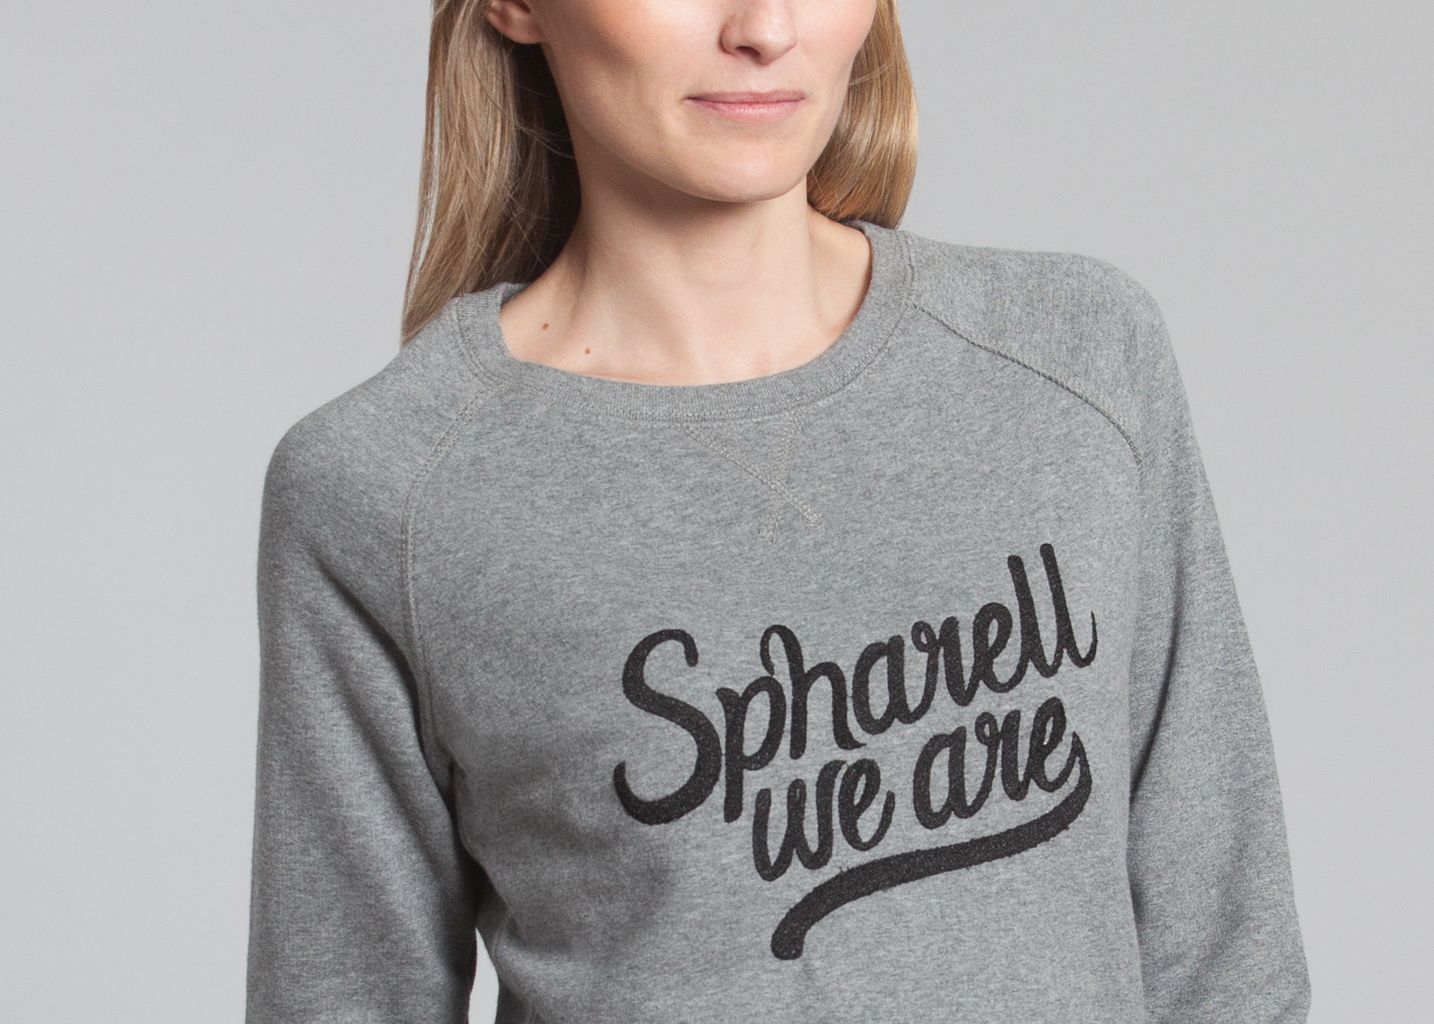 Sweat Spharell We Are - Spharell We Are